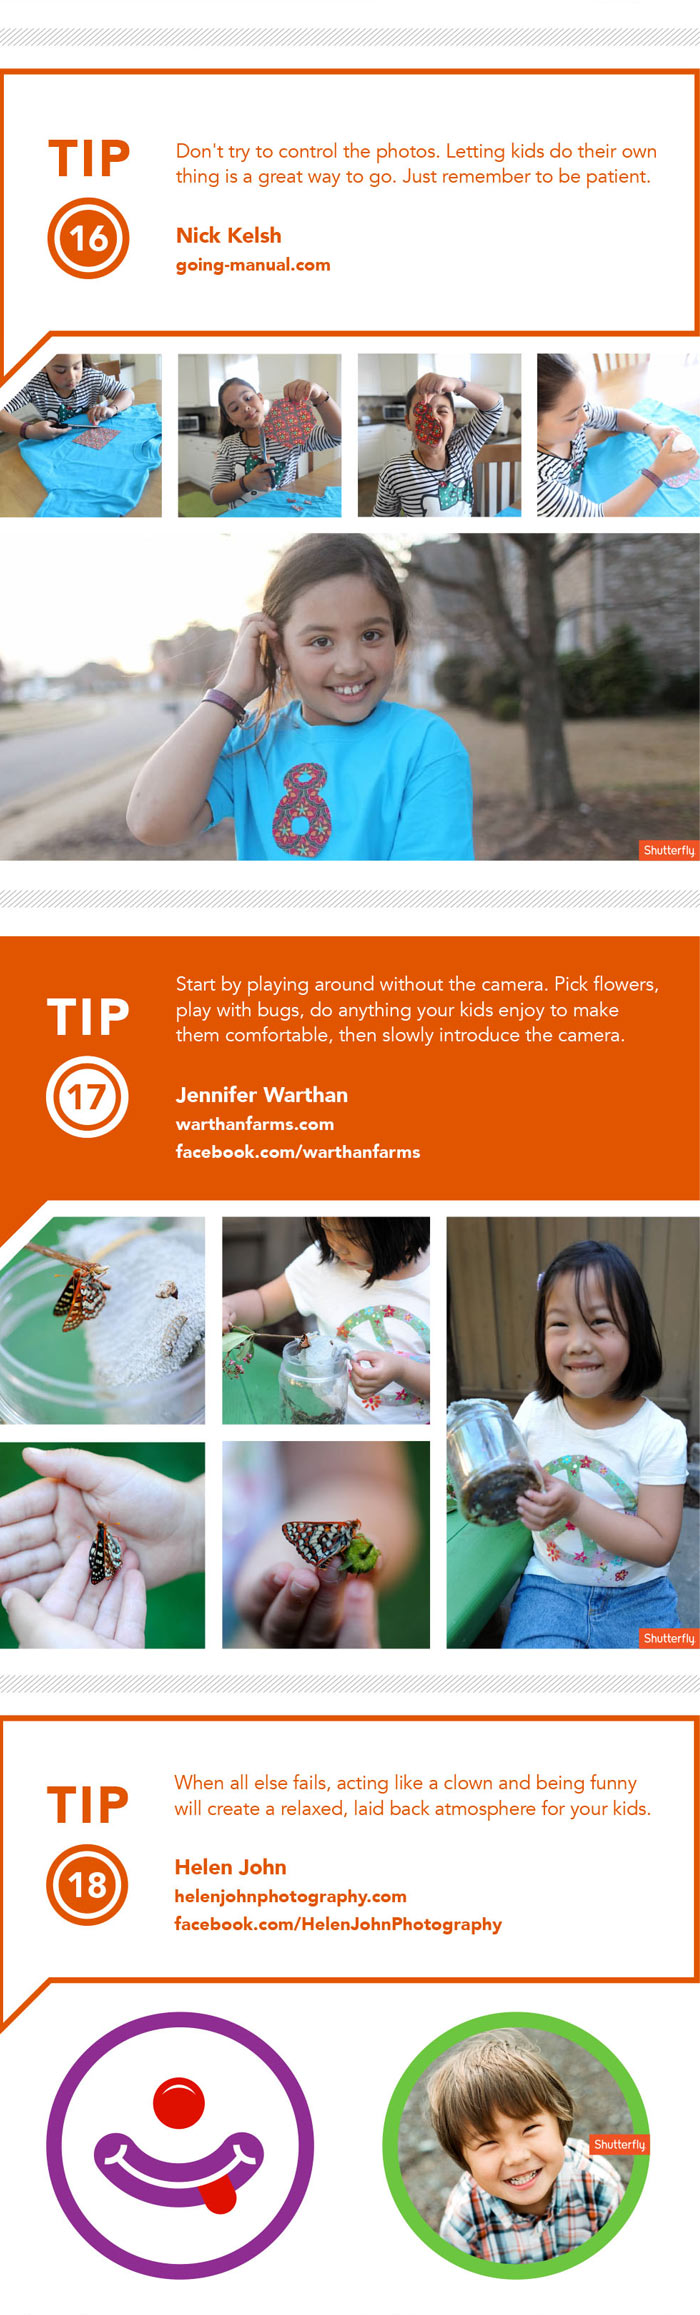 Kids Photography Tips Infographic by Shutterfly